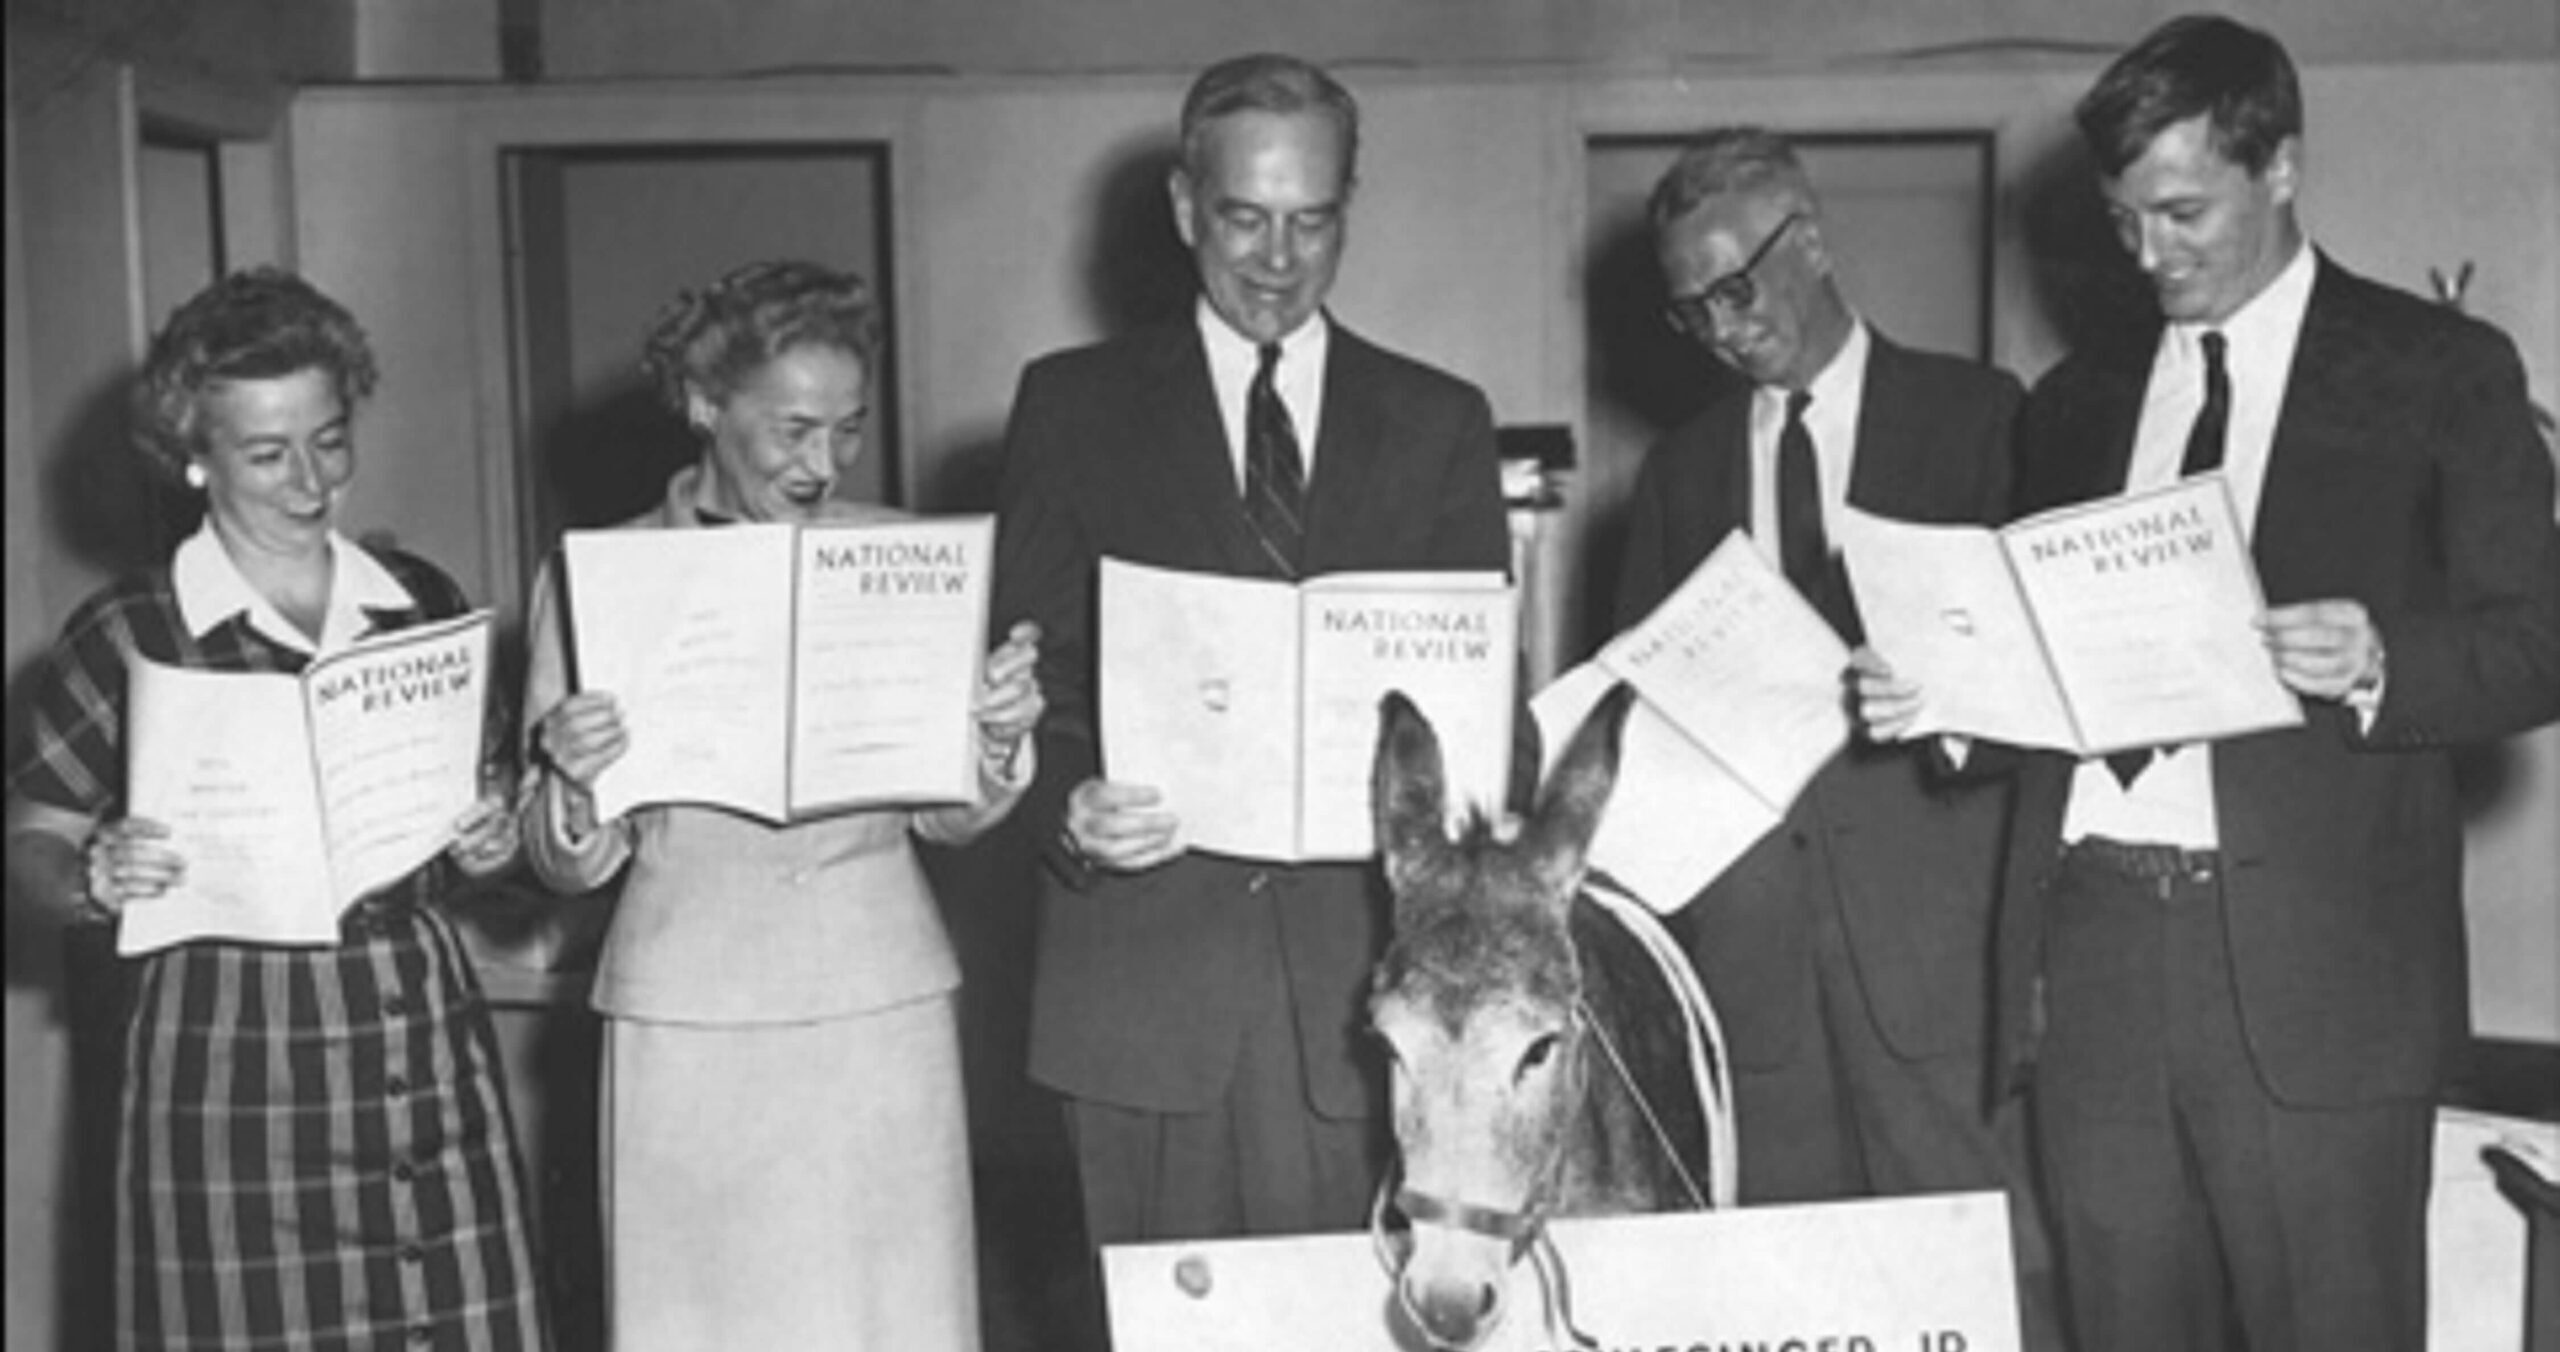 Willmoore Kendall with other members of the National Review editing staff in 1957 (Levan Ramishvili/Flickr)